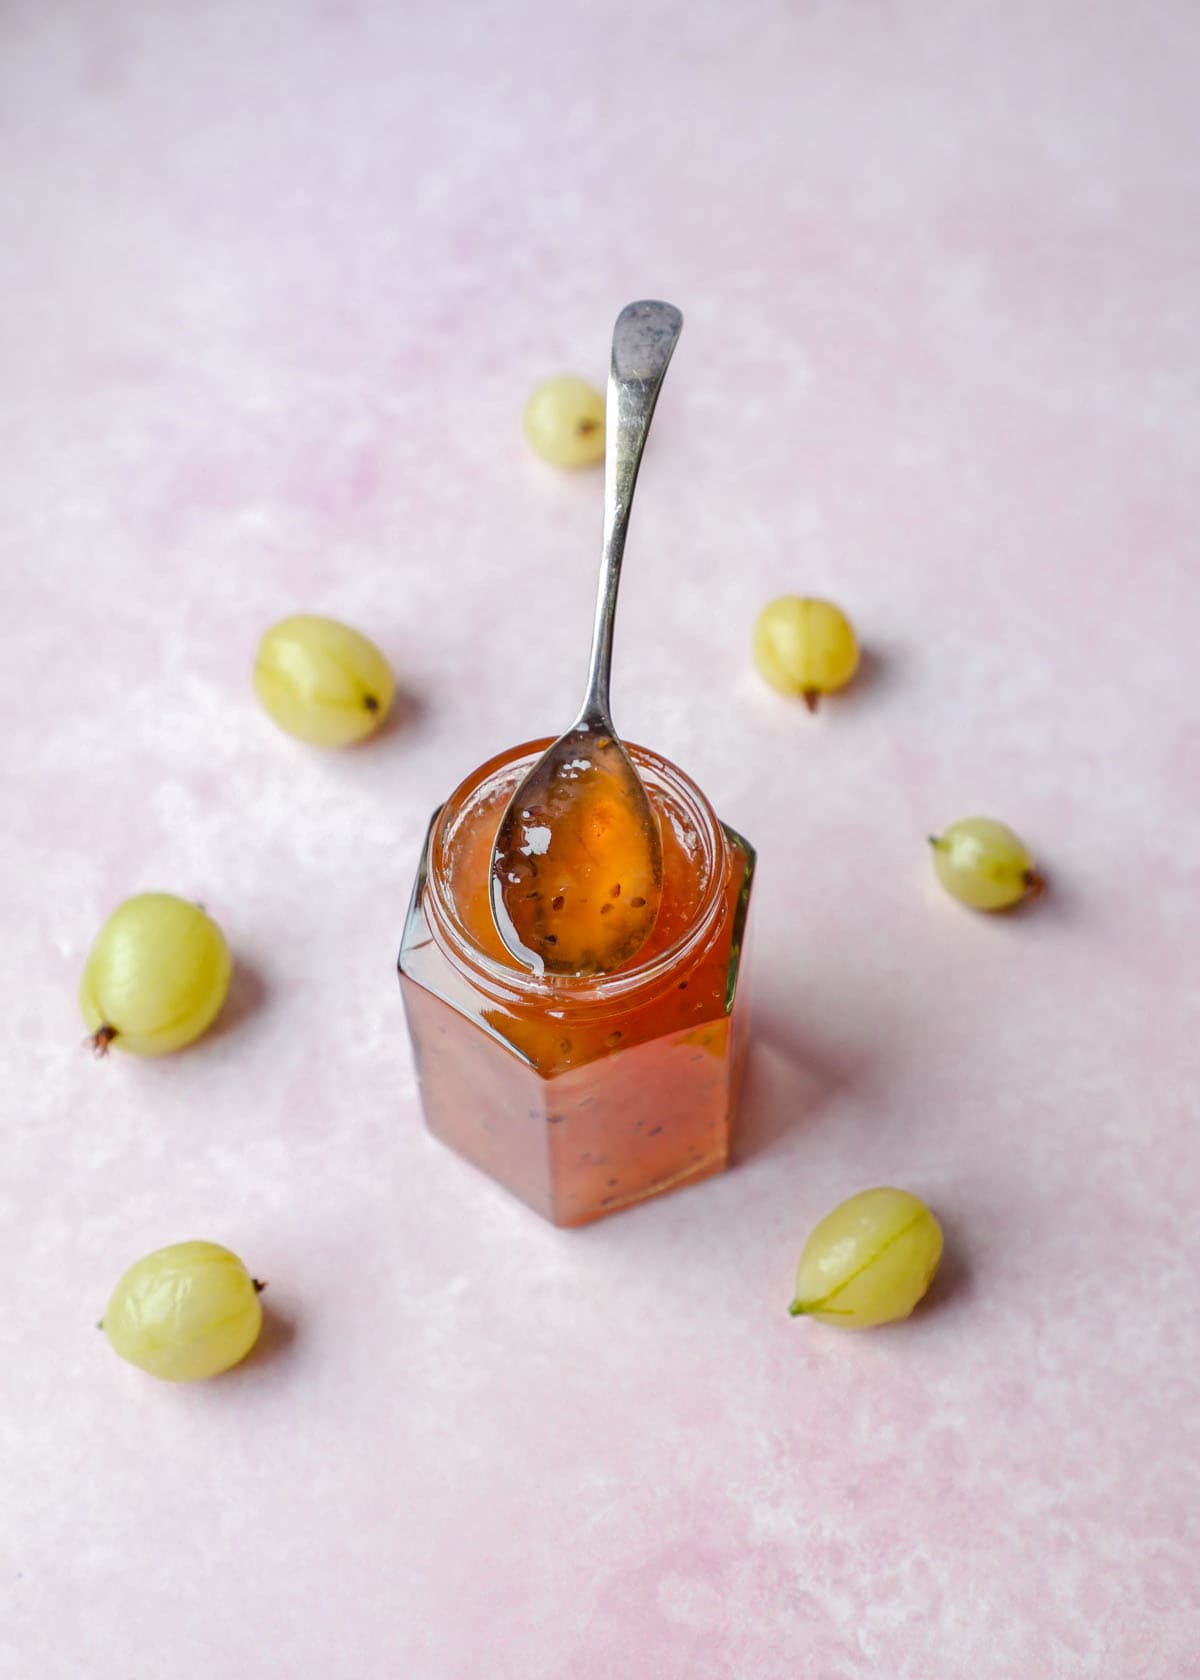 Gooseberry Jam on a spoon with gooseberries